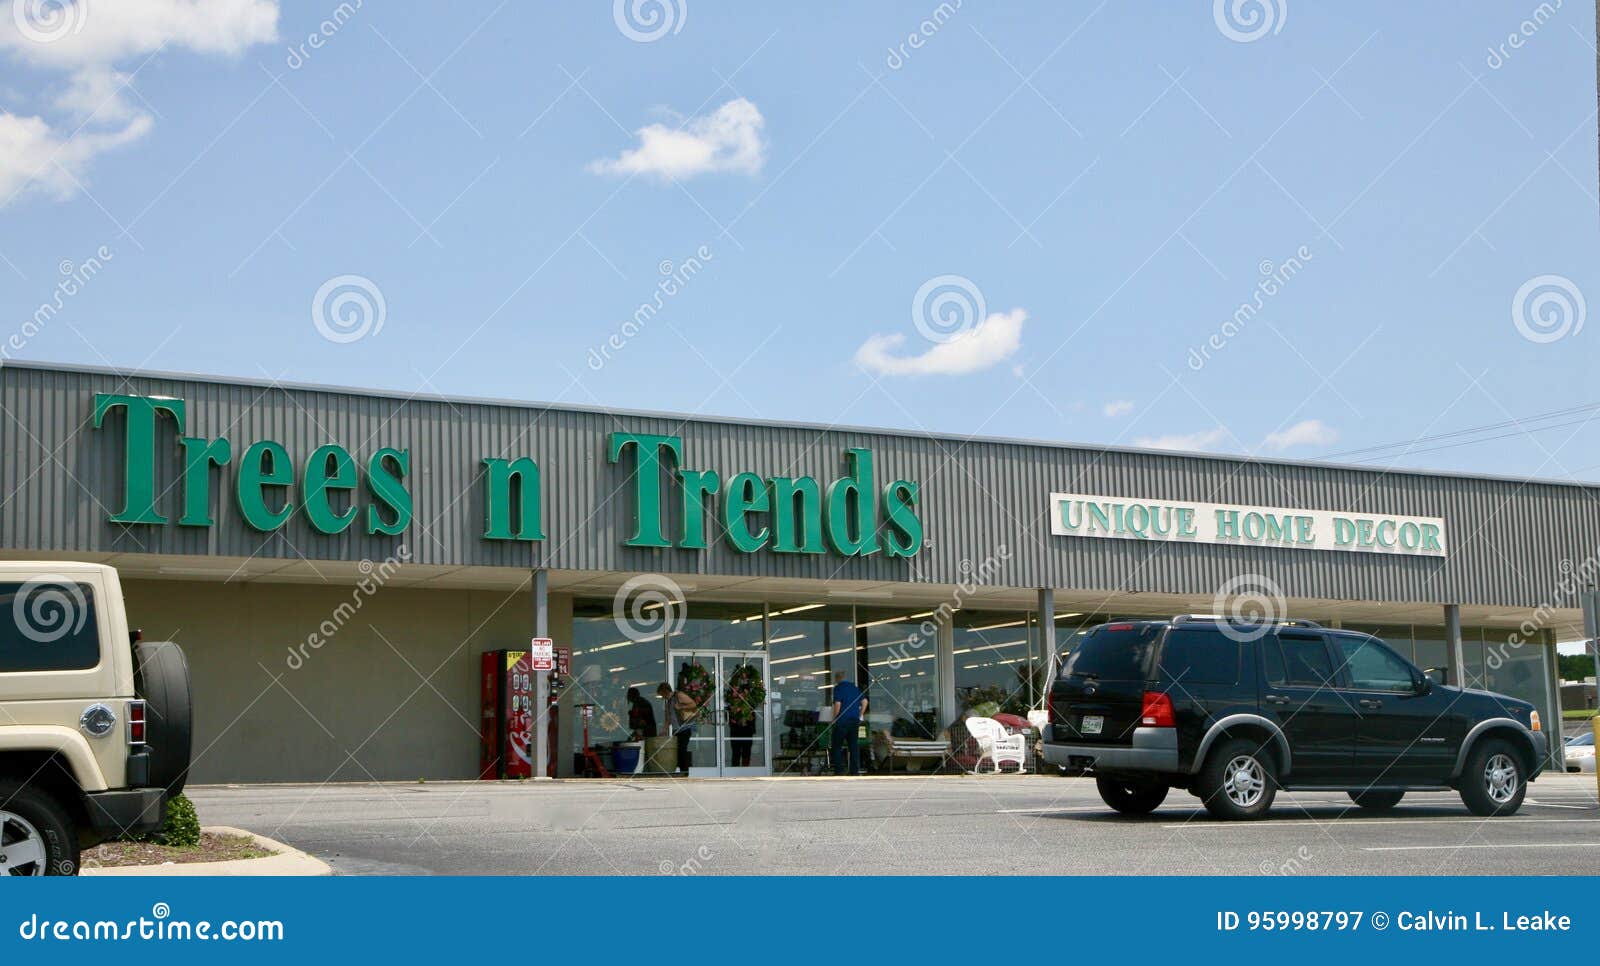 Trees And Trends Home Decor Store Jackson Tennessee Editorial